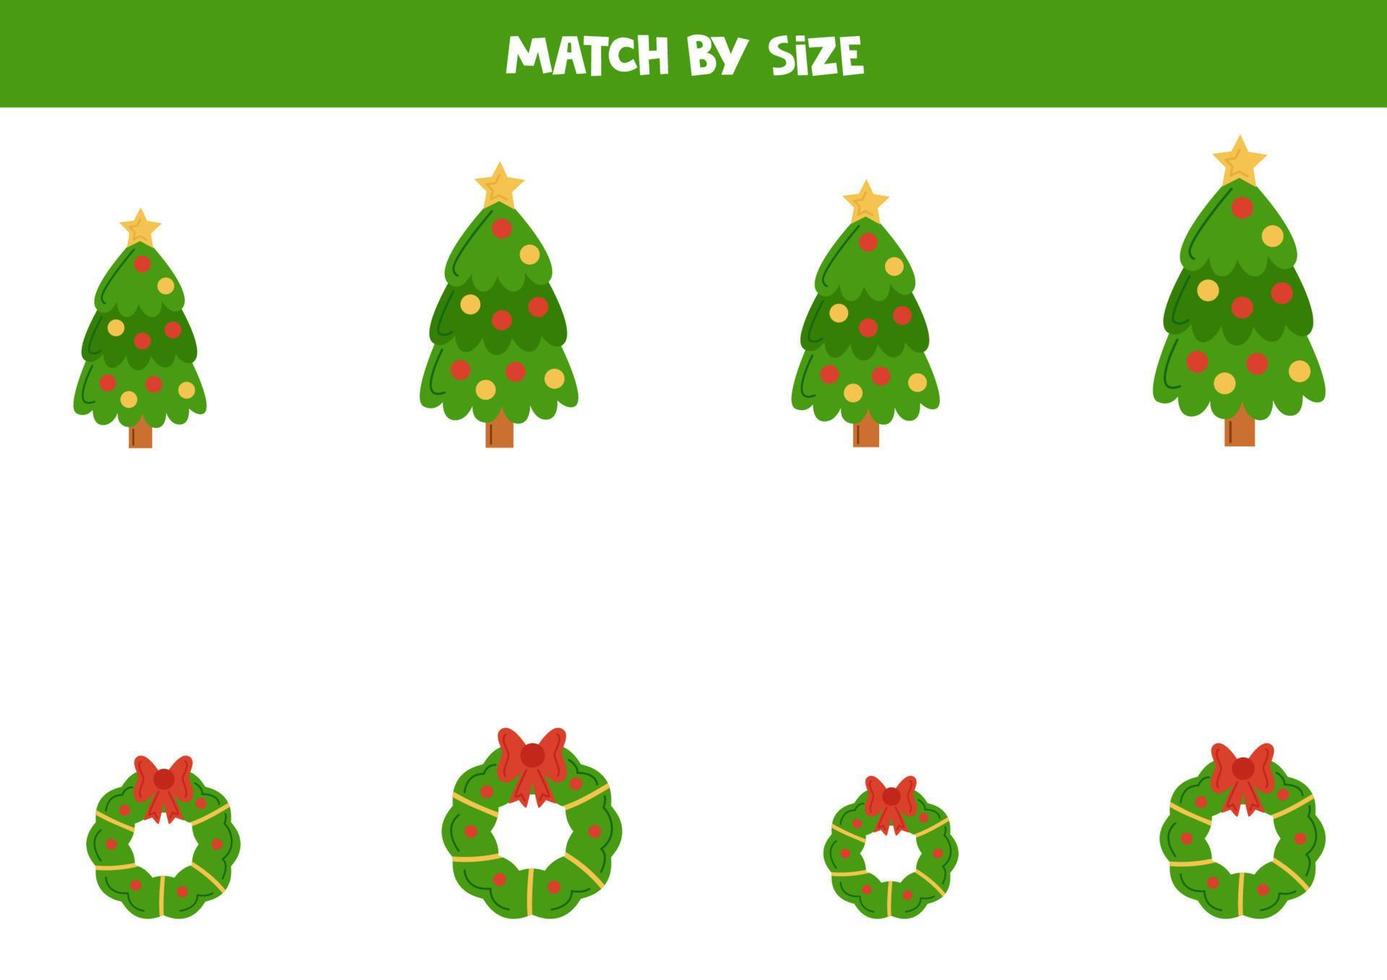 Matching game for preschool kids. Match Christmas trees and wreaths by size. vector